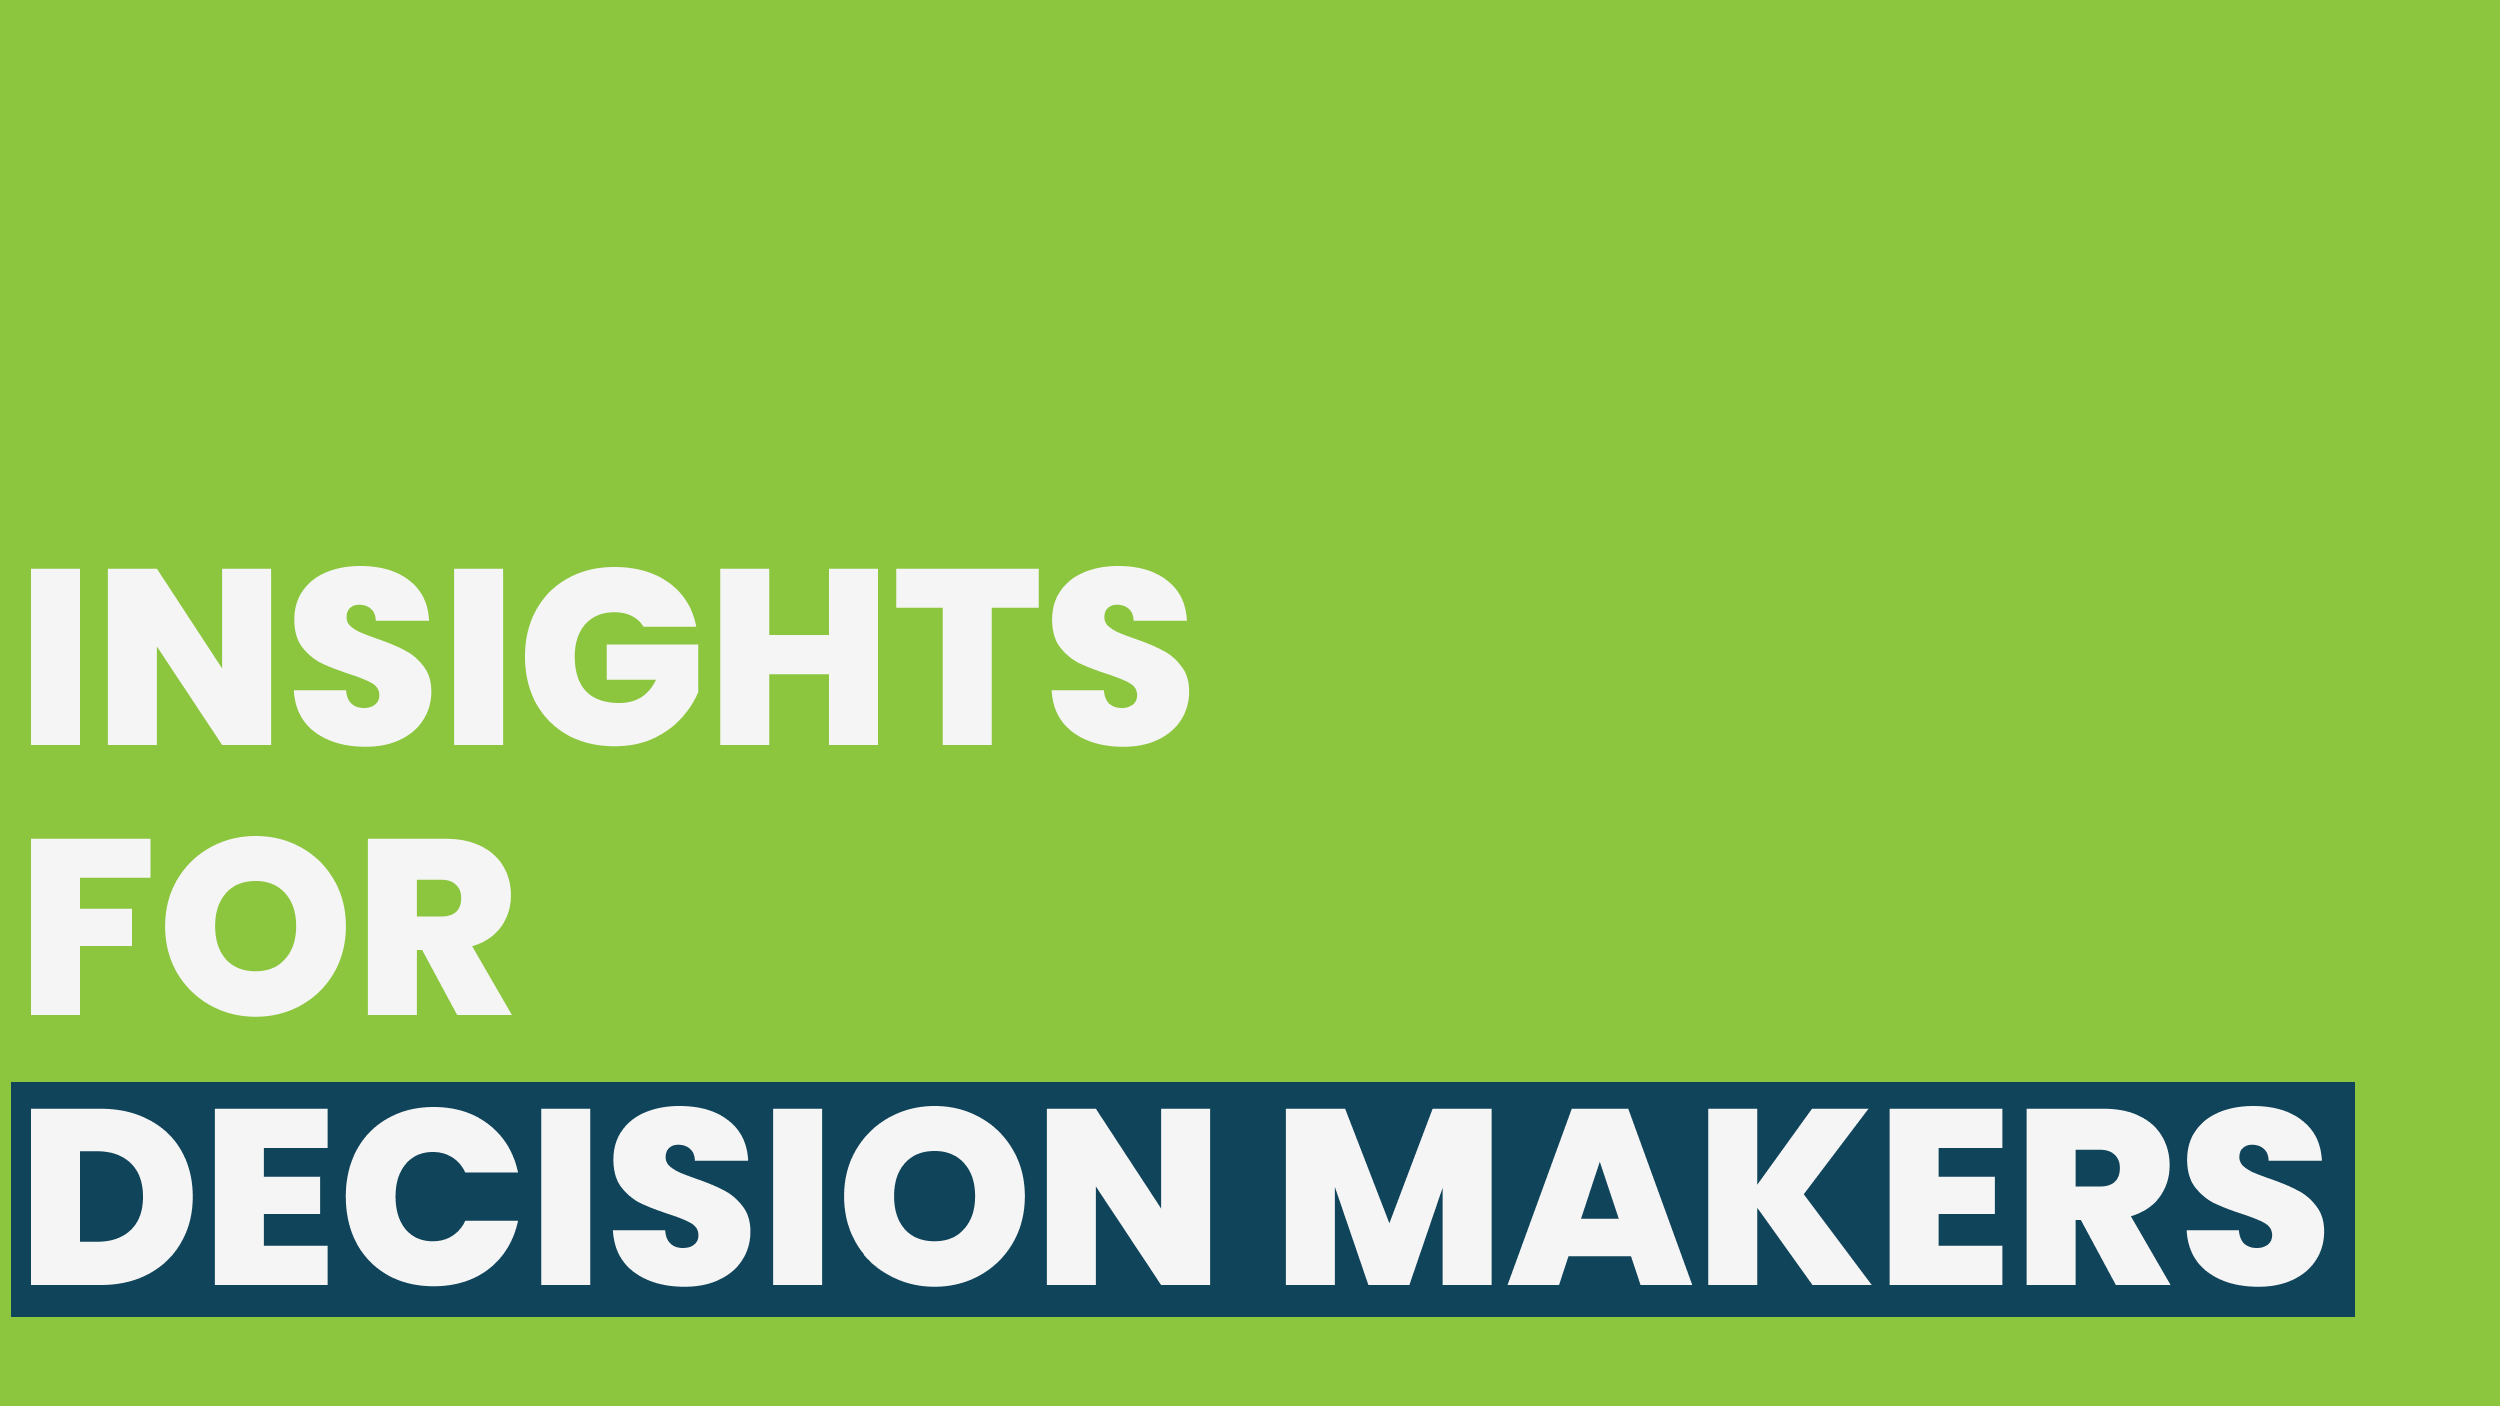 INSIGHTS FOR DECISION MAKERS